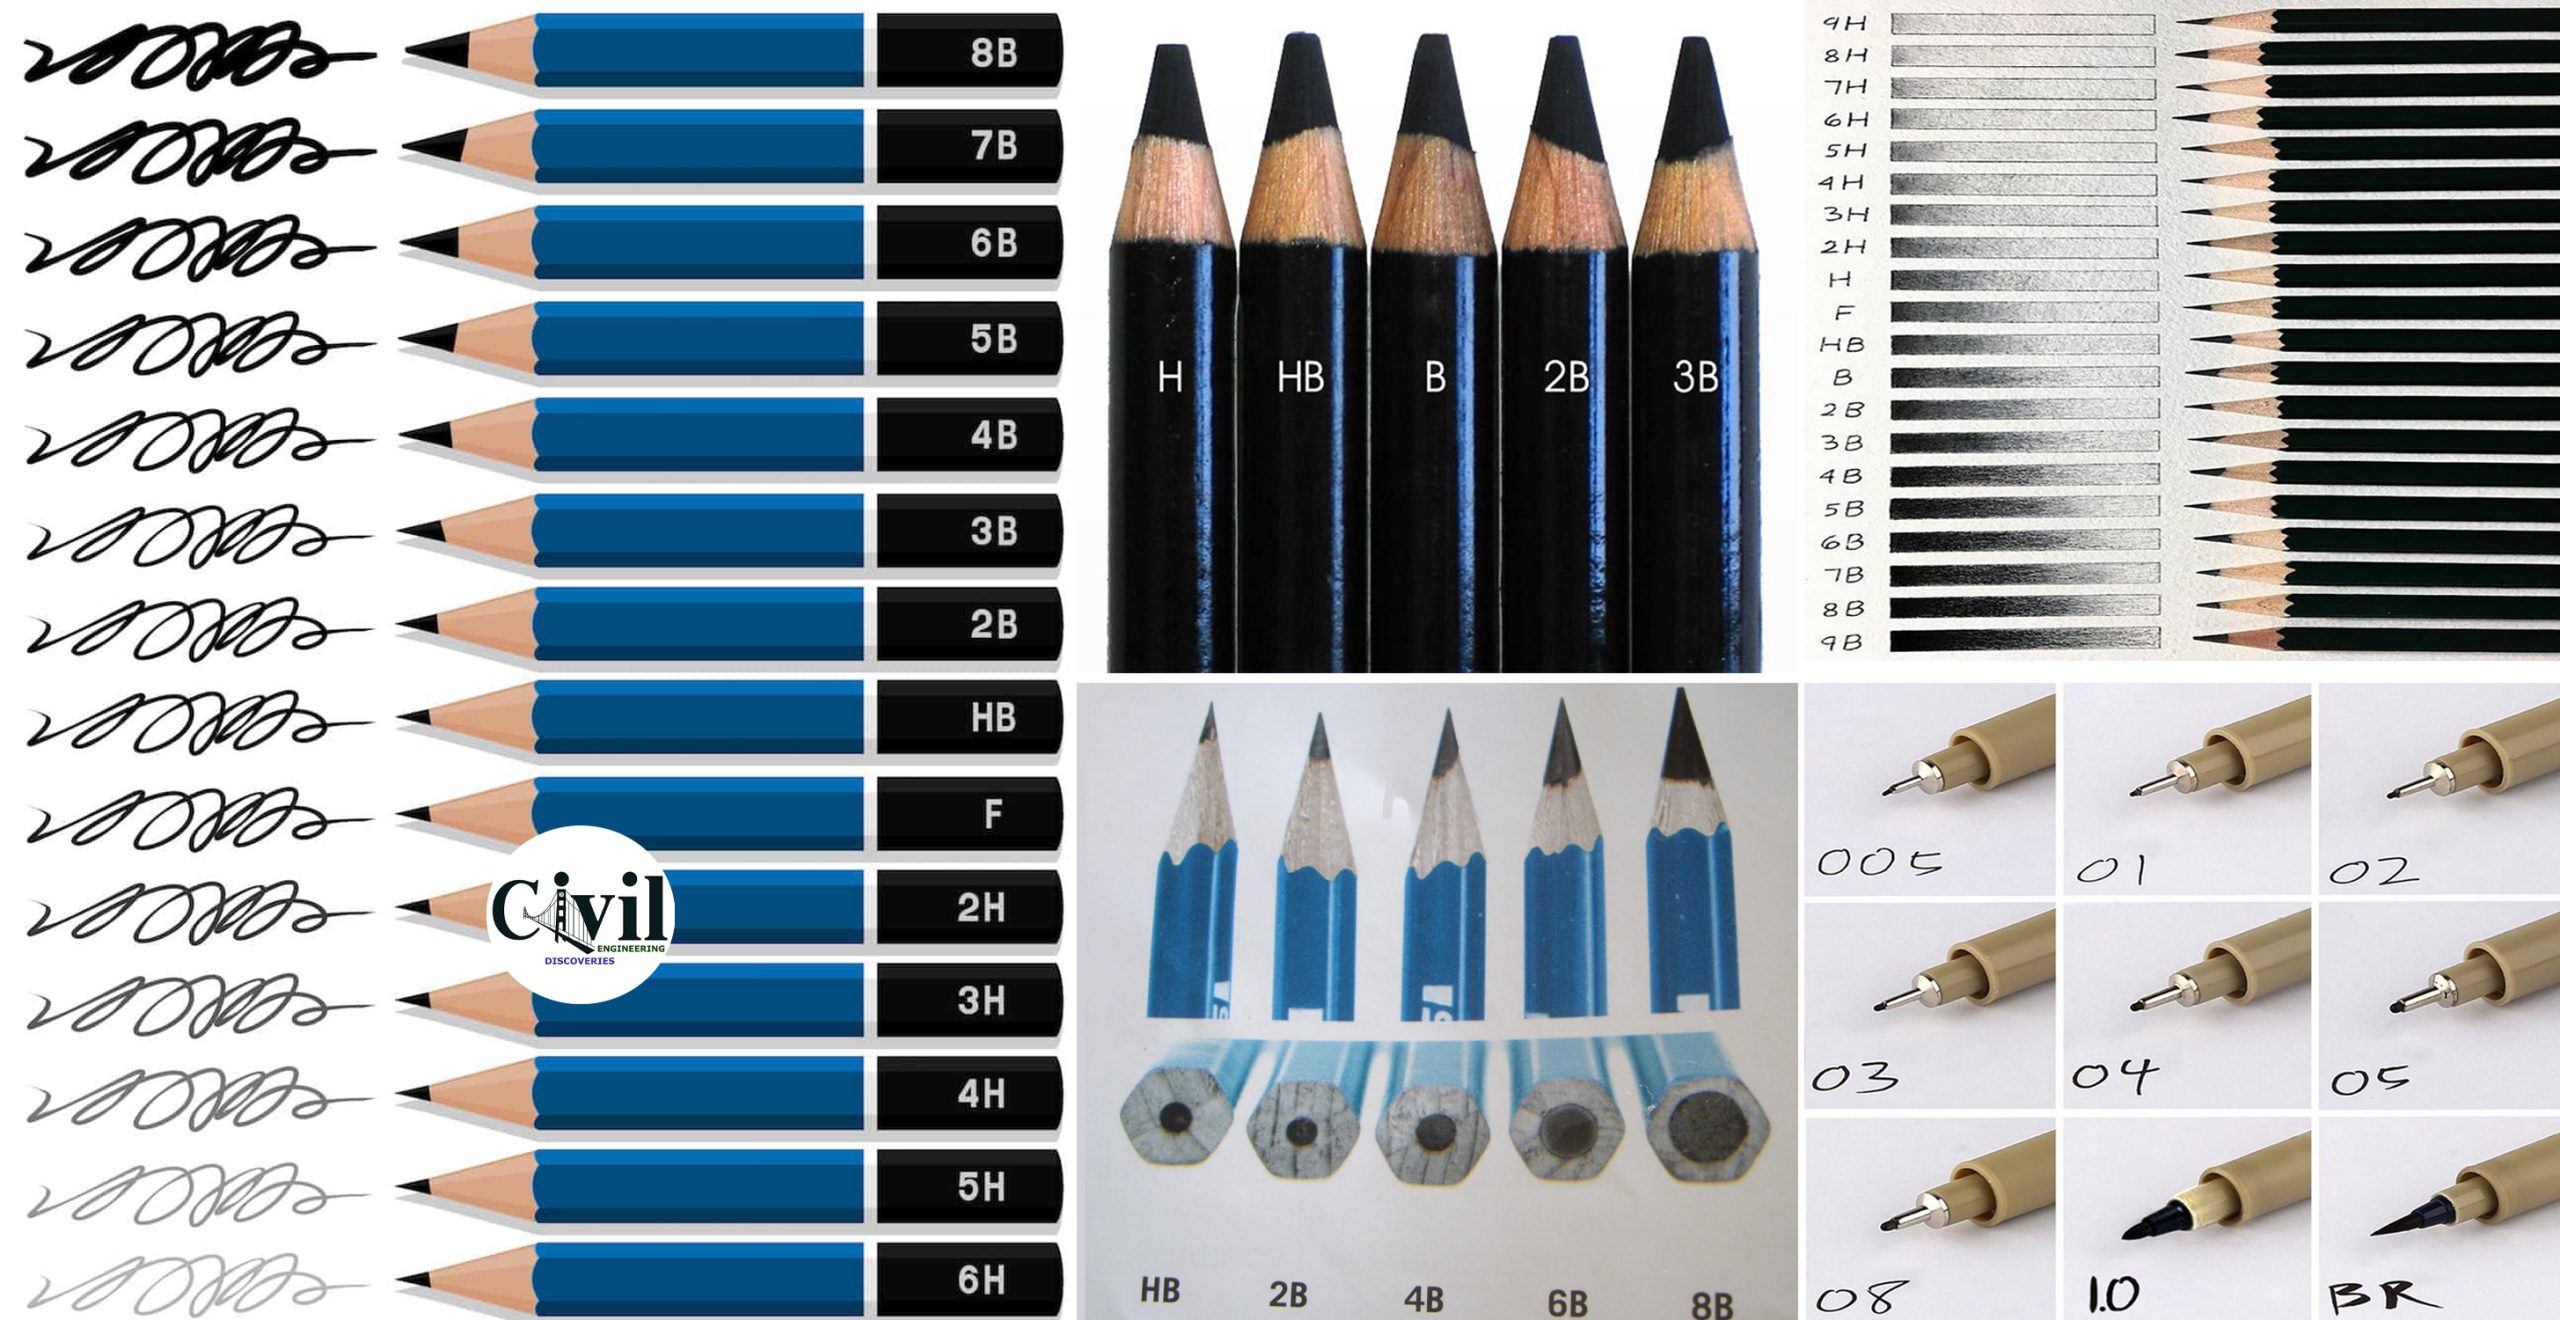 https://engineeringdiscoveries.com/wp-content/uploads/2020/12/14-Different-Types-Of-Pencils-Every-Drawing-Set-Needs-scaled.jpg